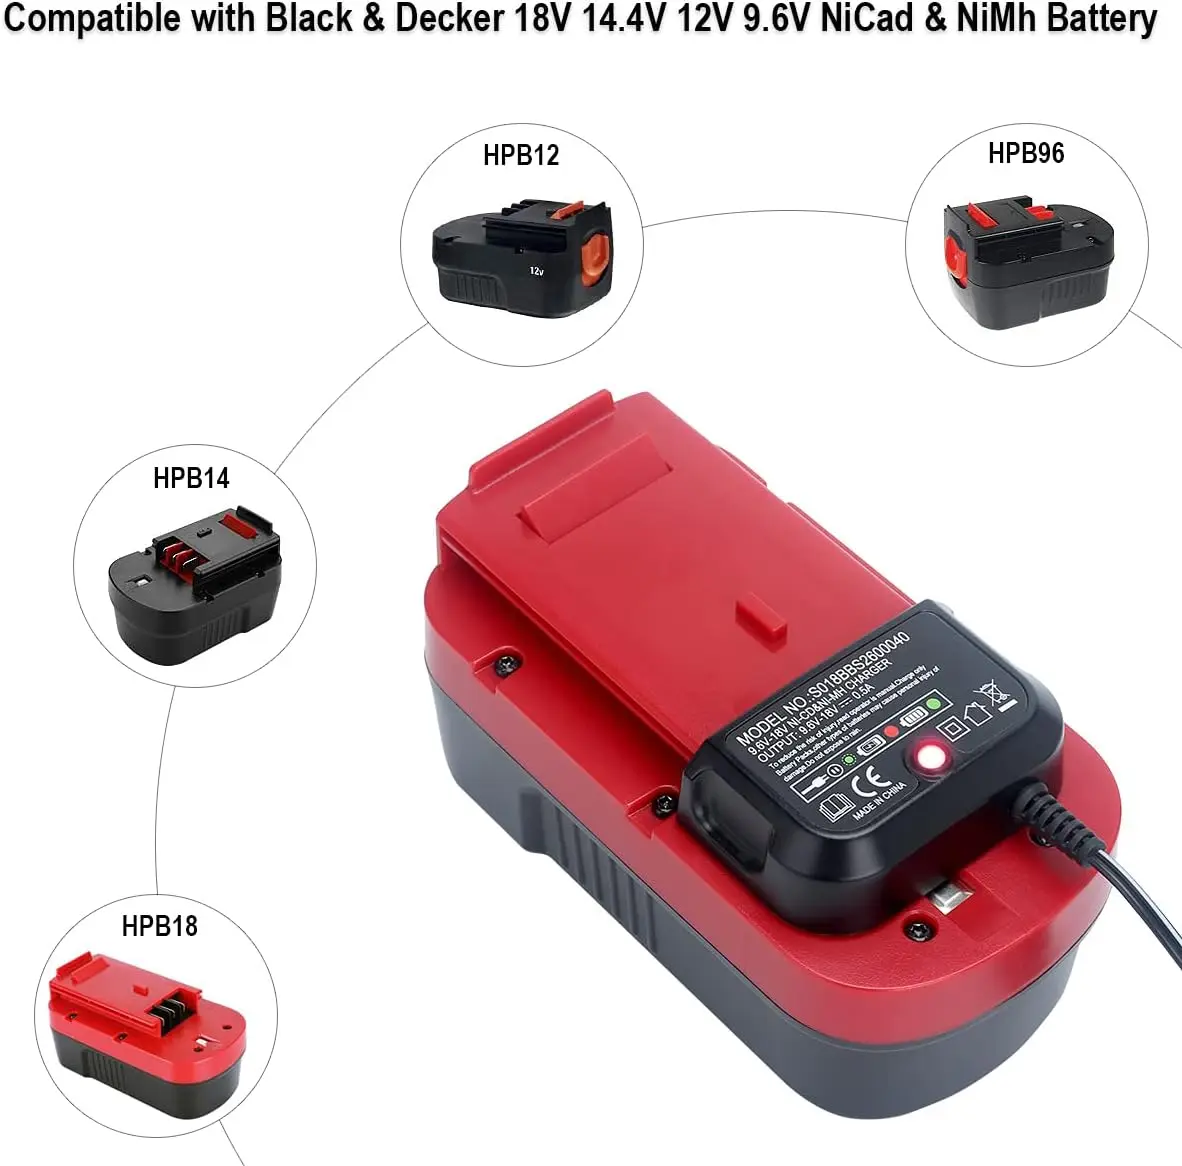 12V Ni-Mh Battery or Charger For Black & Decker HPB12 PS130 FSB12